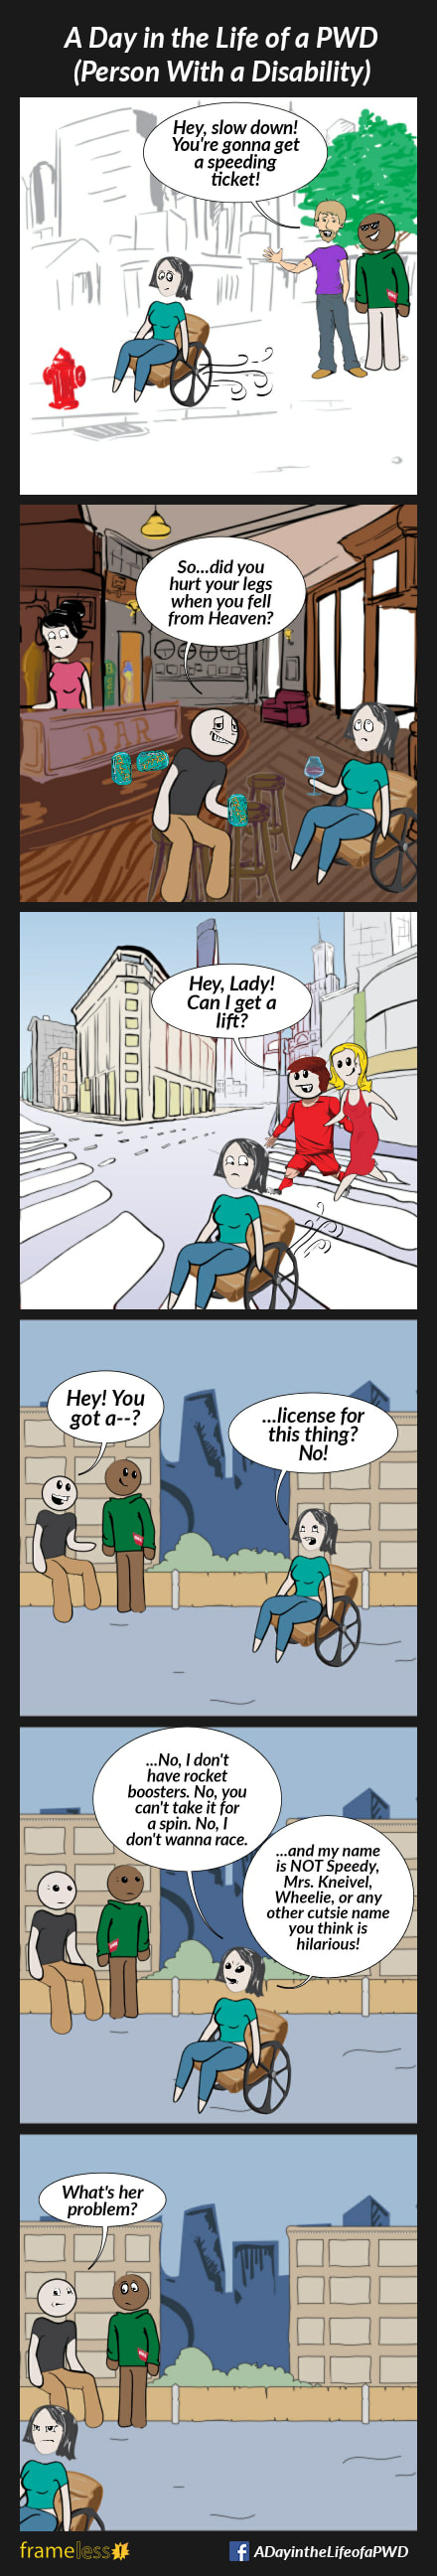 COMIC STRIP 
A Day in the Life of a PWD (Person With a Disability) 

Frame 1:
A woman in a wheelchair is traveling down a sidewalk. She passes two men.
MAN A: Hey, slow down! You're gonna get a speeding ticket!
Man B grins.

Frame 2:
The woman is having a drink in a pub. Nearby, a drunken man leans toward her.
MAN: So...did you hurt your legs when you fell from heaven?
The woman rolls her eyes.

Frame 3:
The woman is crossing a crosswalk walk. A man and his girlfriend are walking behind her.
MAN: Hey, lady! Can I get a lift?
The girlfriend is amused. The woman is not.

Frame 4:
The woman is traveling down a road. Two men, hanging out by a wall, notice her.
MAN A: Hey! You got a--?
WOMAN (interrupting): ...license for this thing? No!

Frame 5:
WOMAN: .No, I don't have rocket boosters. No, you can't take it for a 
spin. No, don't wanna race
.......and my name is NOT Speedy, 
Mrs. Kneivel, Wheelie, or any other cutsie name you think is hilarious!

Frame 6:
The woman rolls away angrily.
The men are stunned.
MAN A: What's her problem?